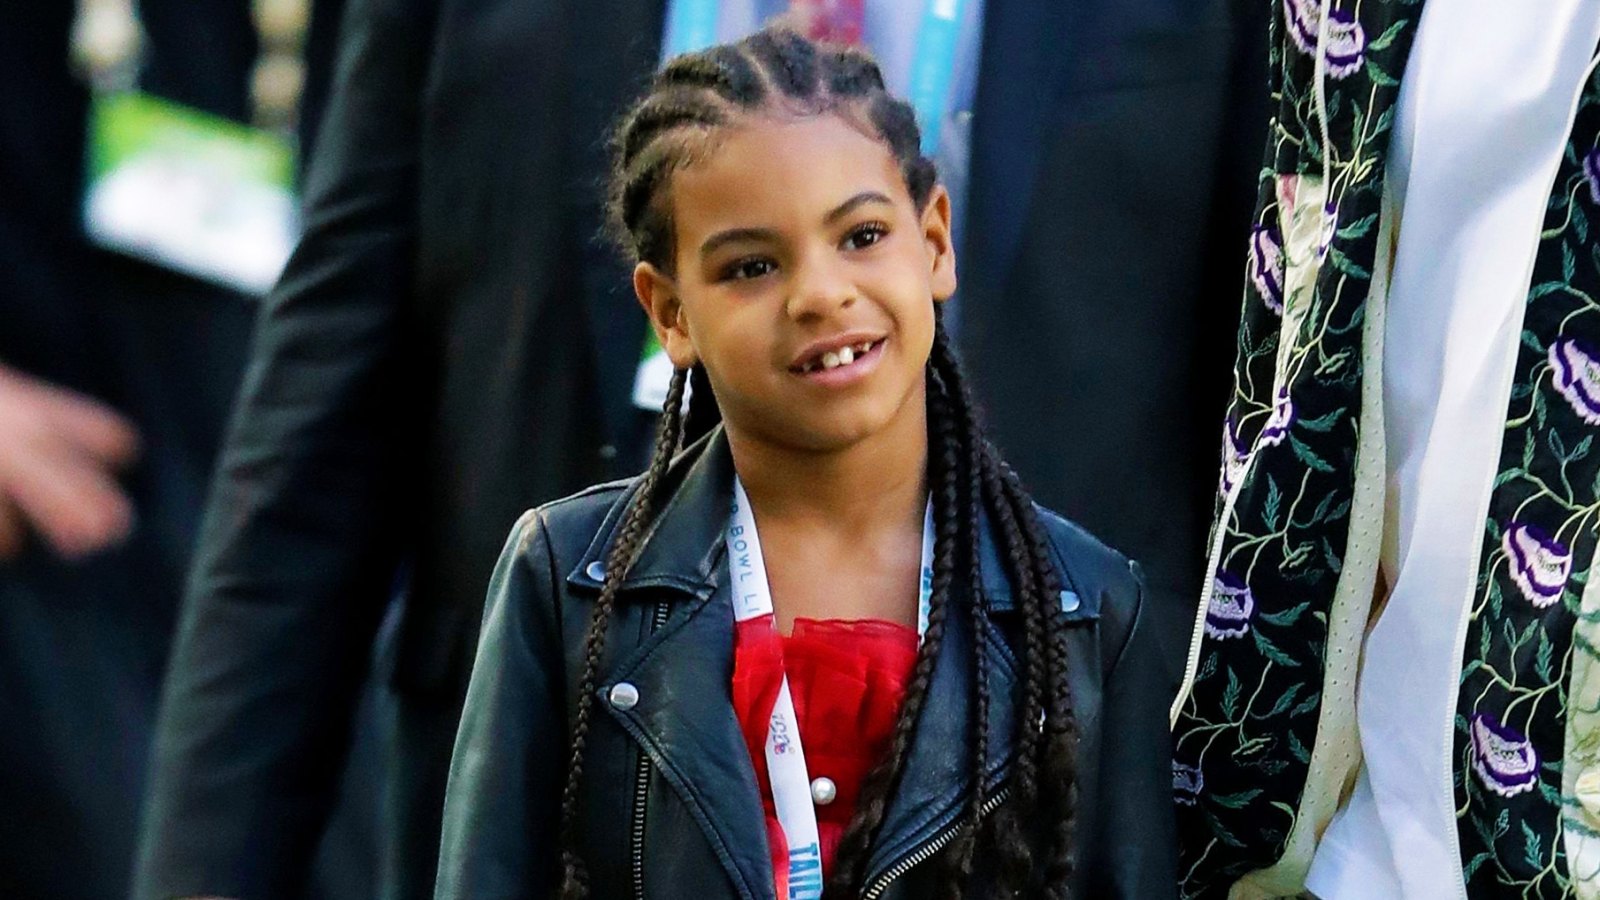 Blue Ivy Carter Does an Adorable PSA About Washing Your Hands